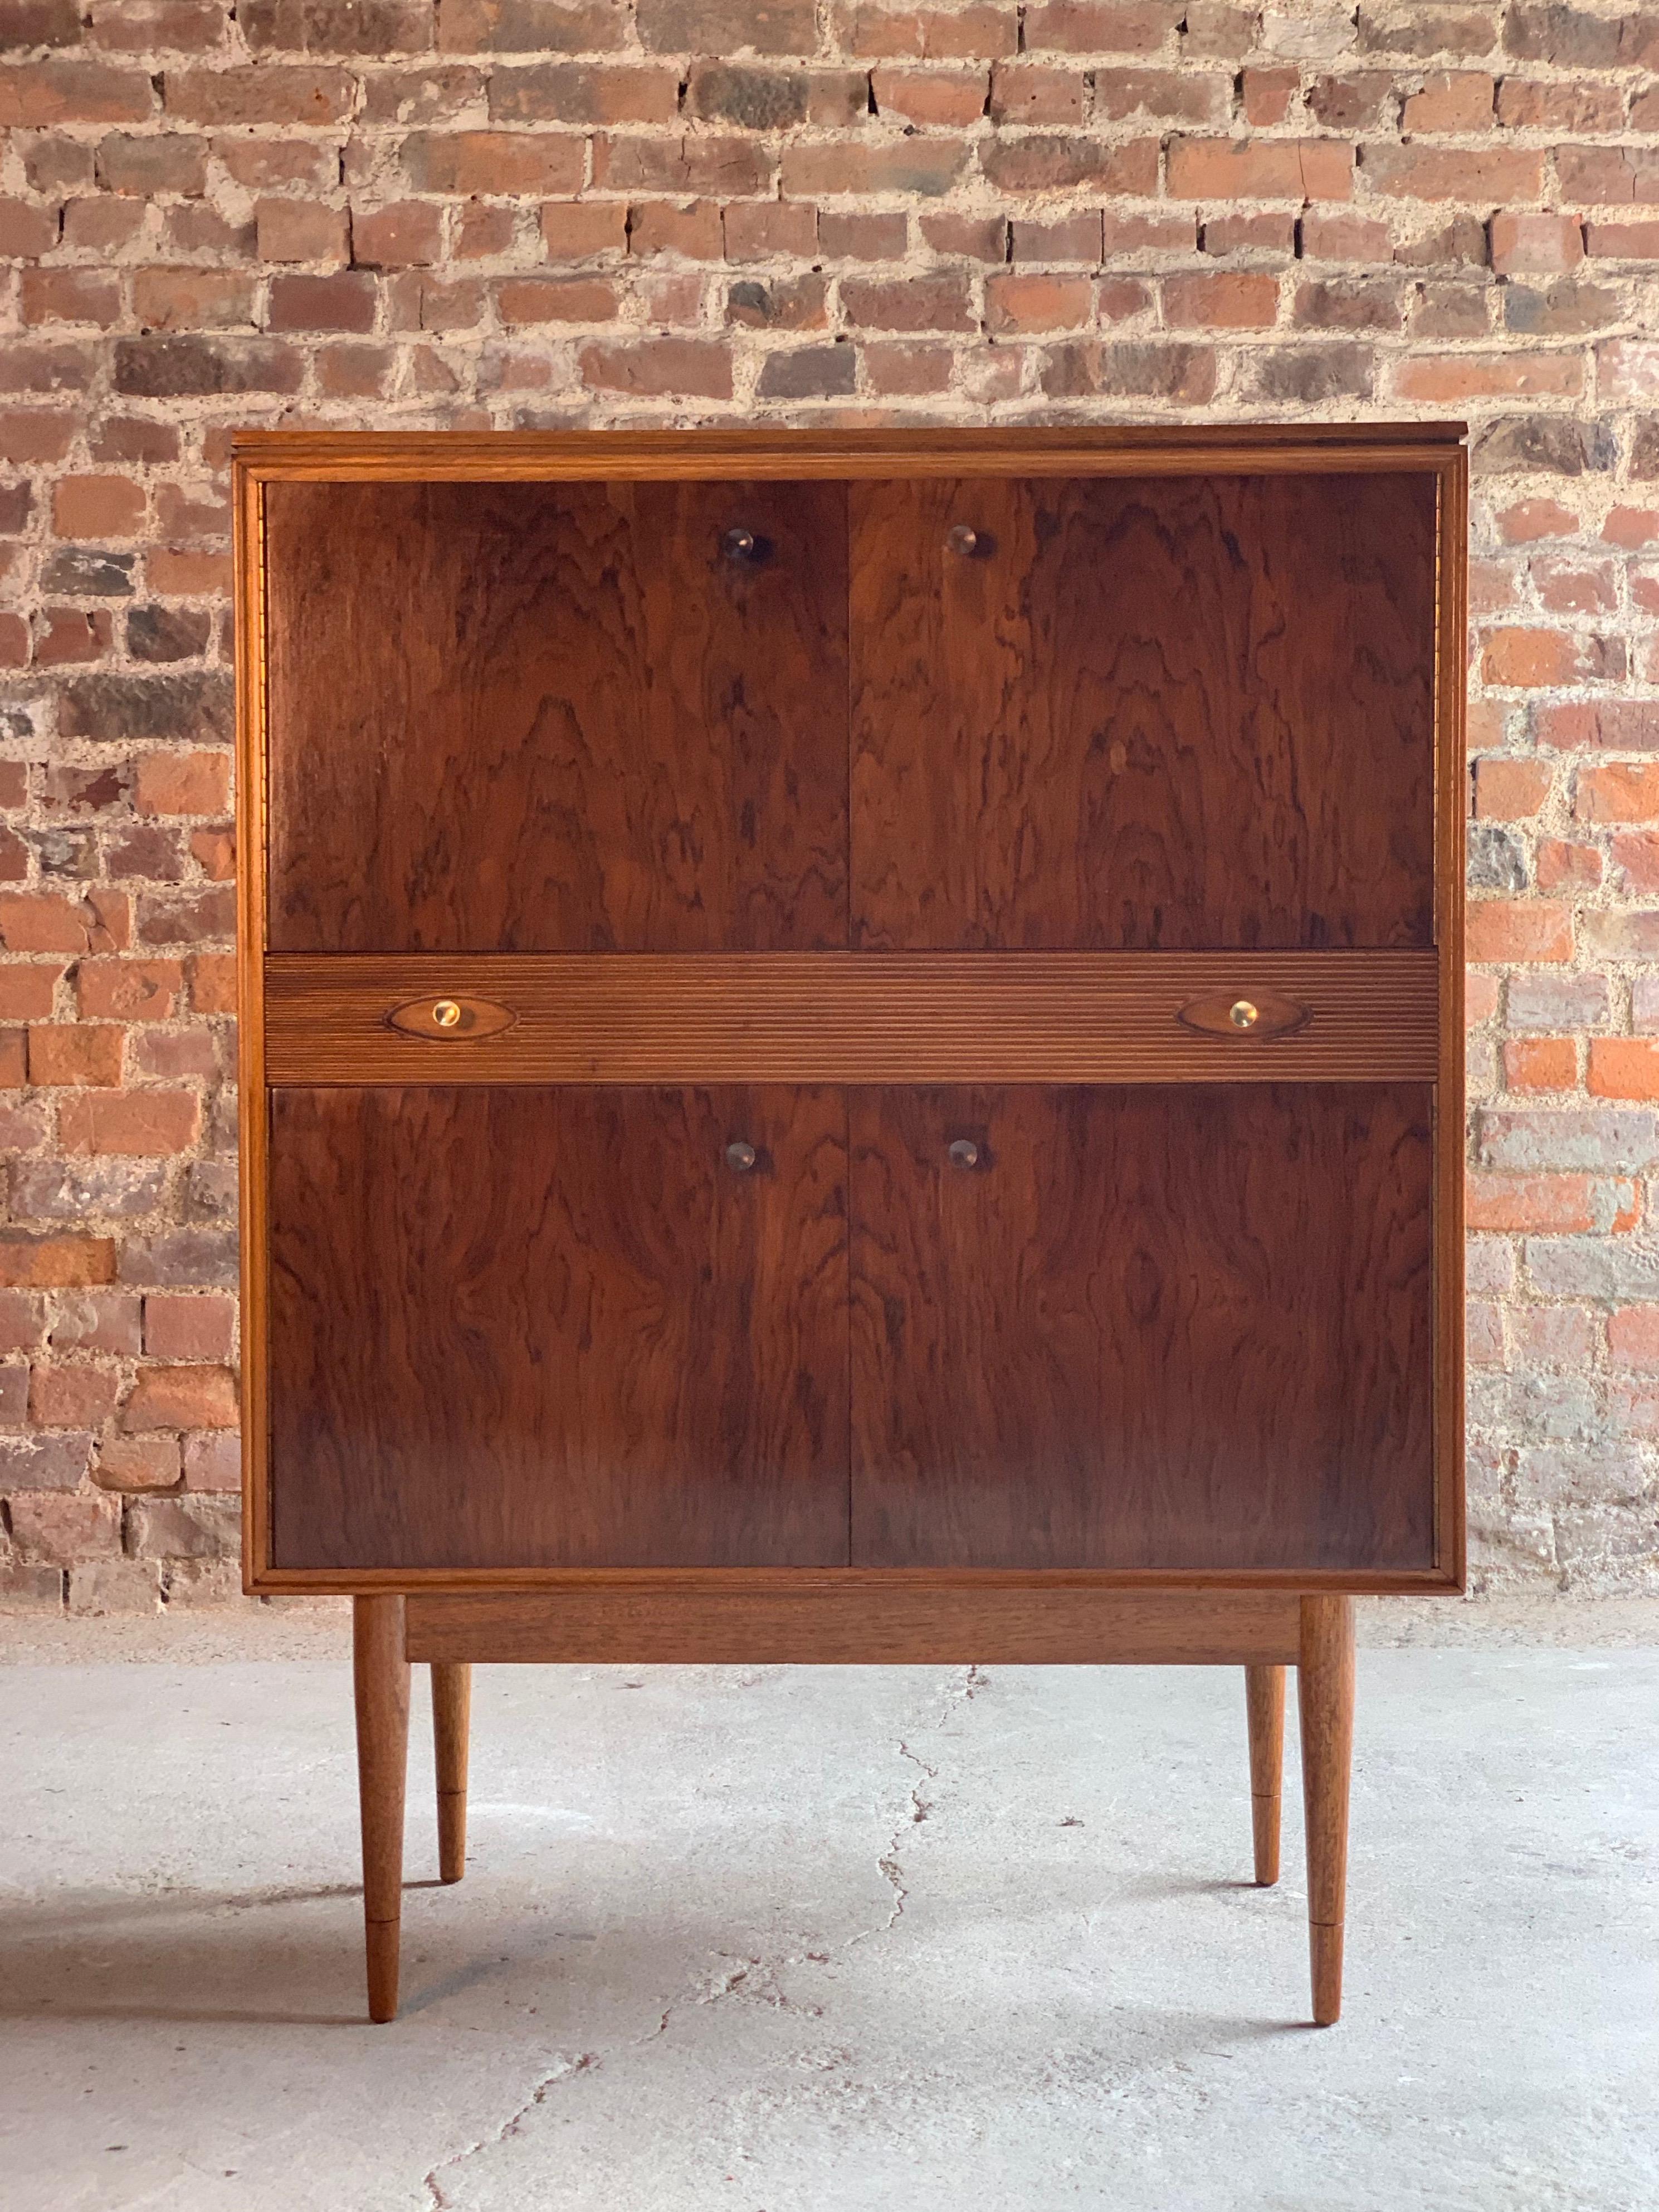 Robert Heritage for Archie Shine rosewood cocktail cabinet Hamilton Range 1960s

Midcentury Hamilton rosewood cocktail cabinet designed by Robert Heritage and manufactured by Archie Shine circa 1960, wonderfully styled and beautifully constructed